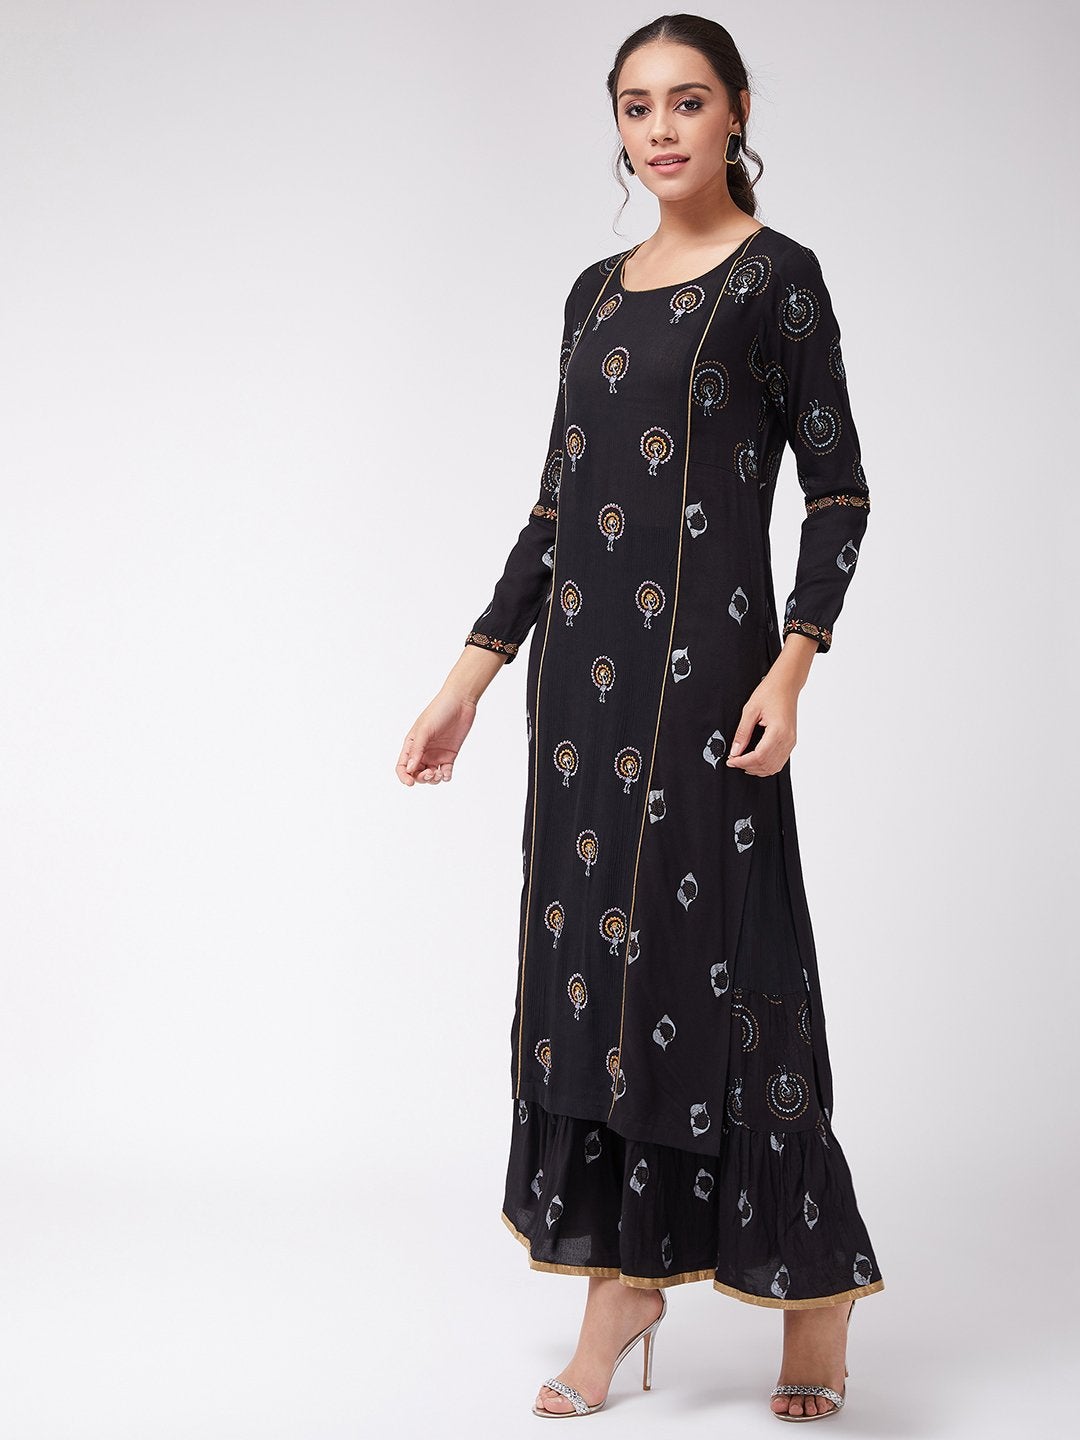 Women's Foil Printed And Embroidered Long Kurta - Pannkh